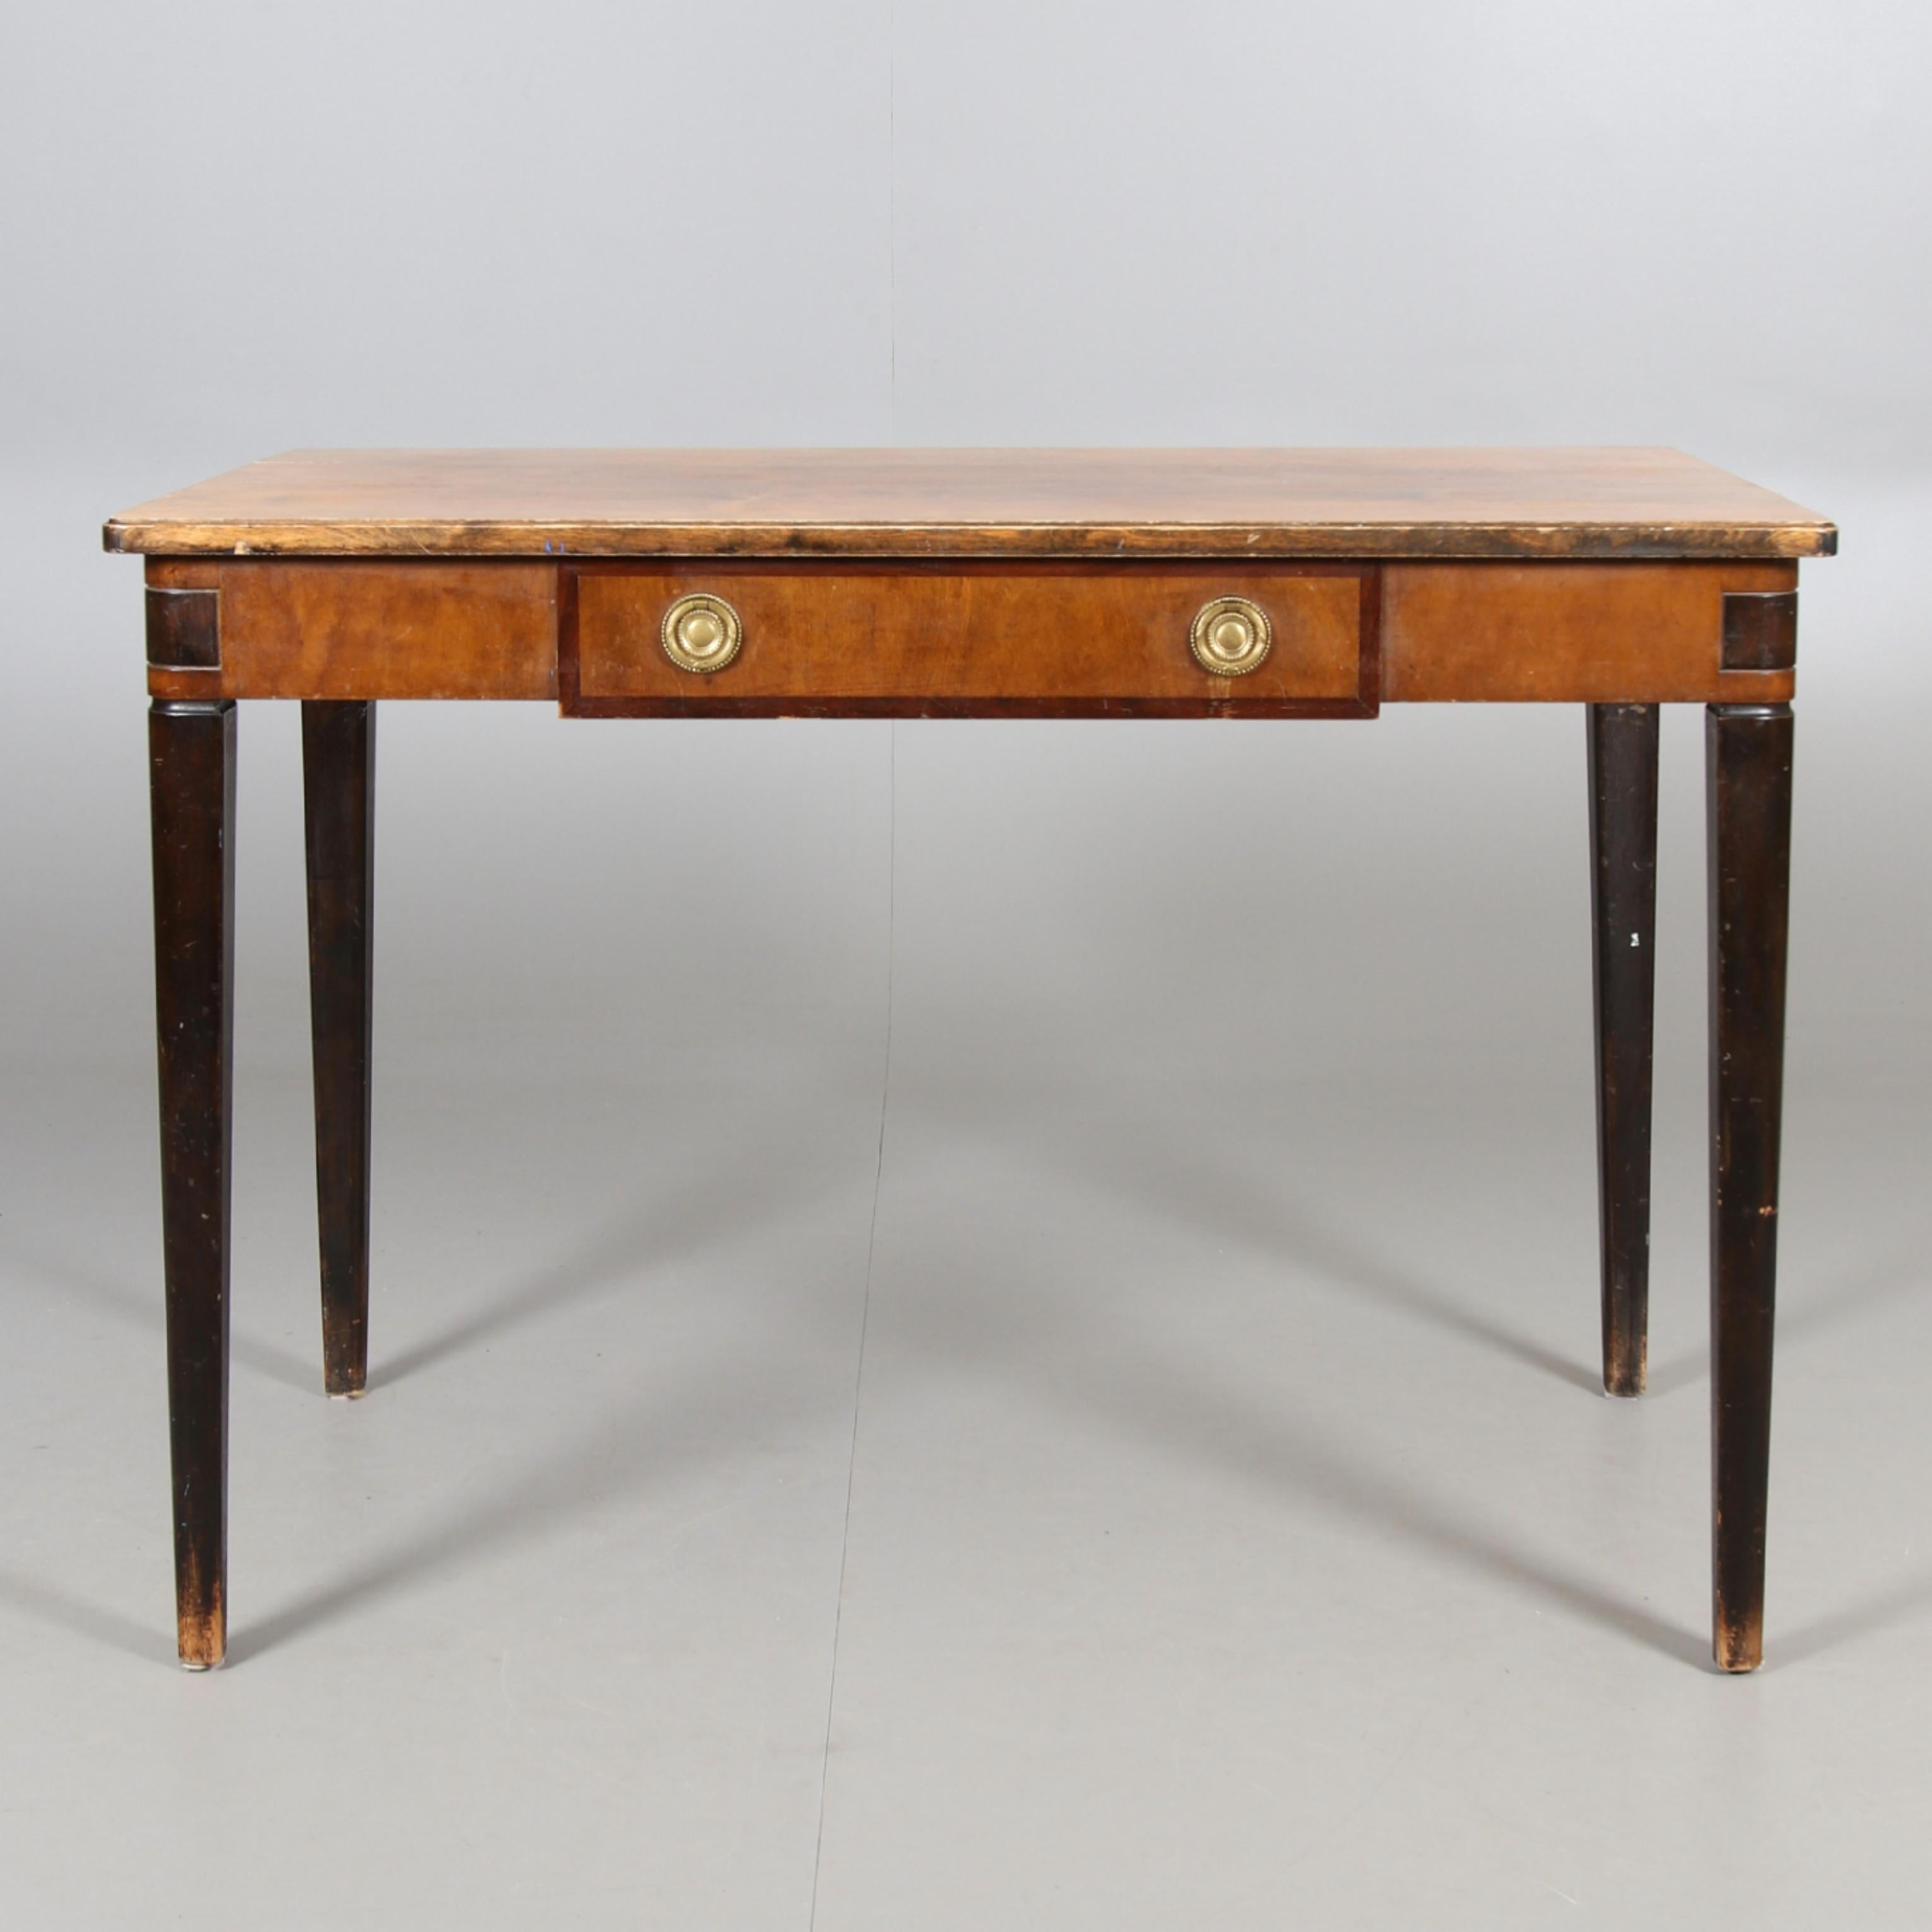 Desk in beech from Hotel Knaust by Nordiska Kompaniet / NK, Sweden 1931.

With brass details and signed with NK badge and tracking number (easy to see who ordered the furniture and when through NK-liggaren at Nordiska Museet (museum Nordic culture